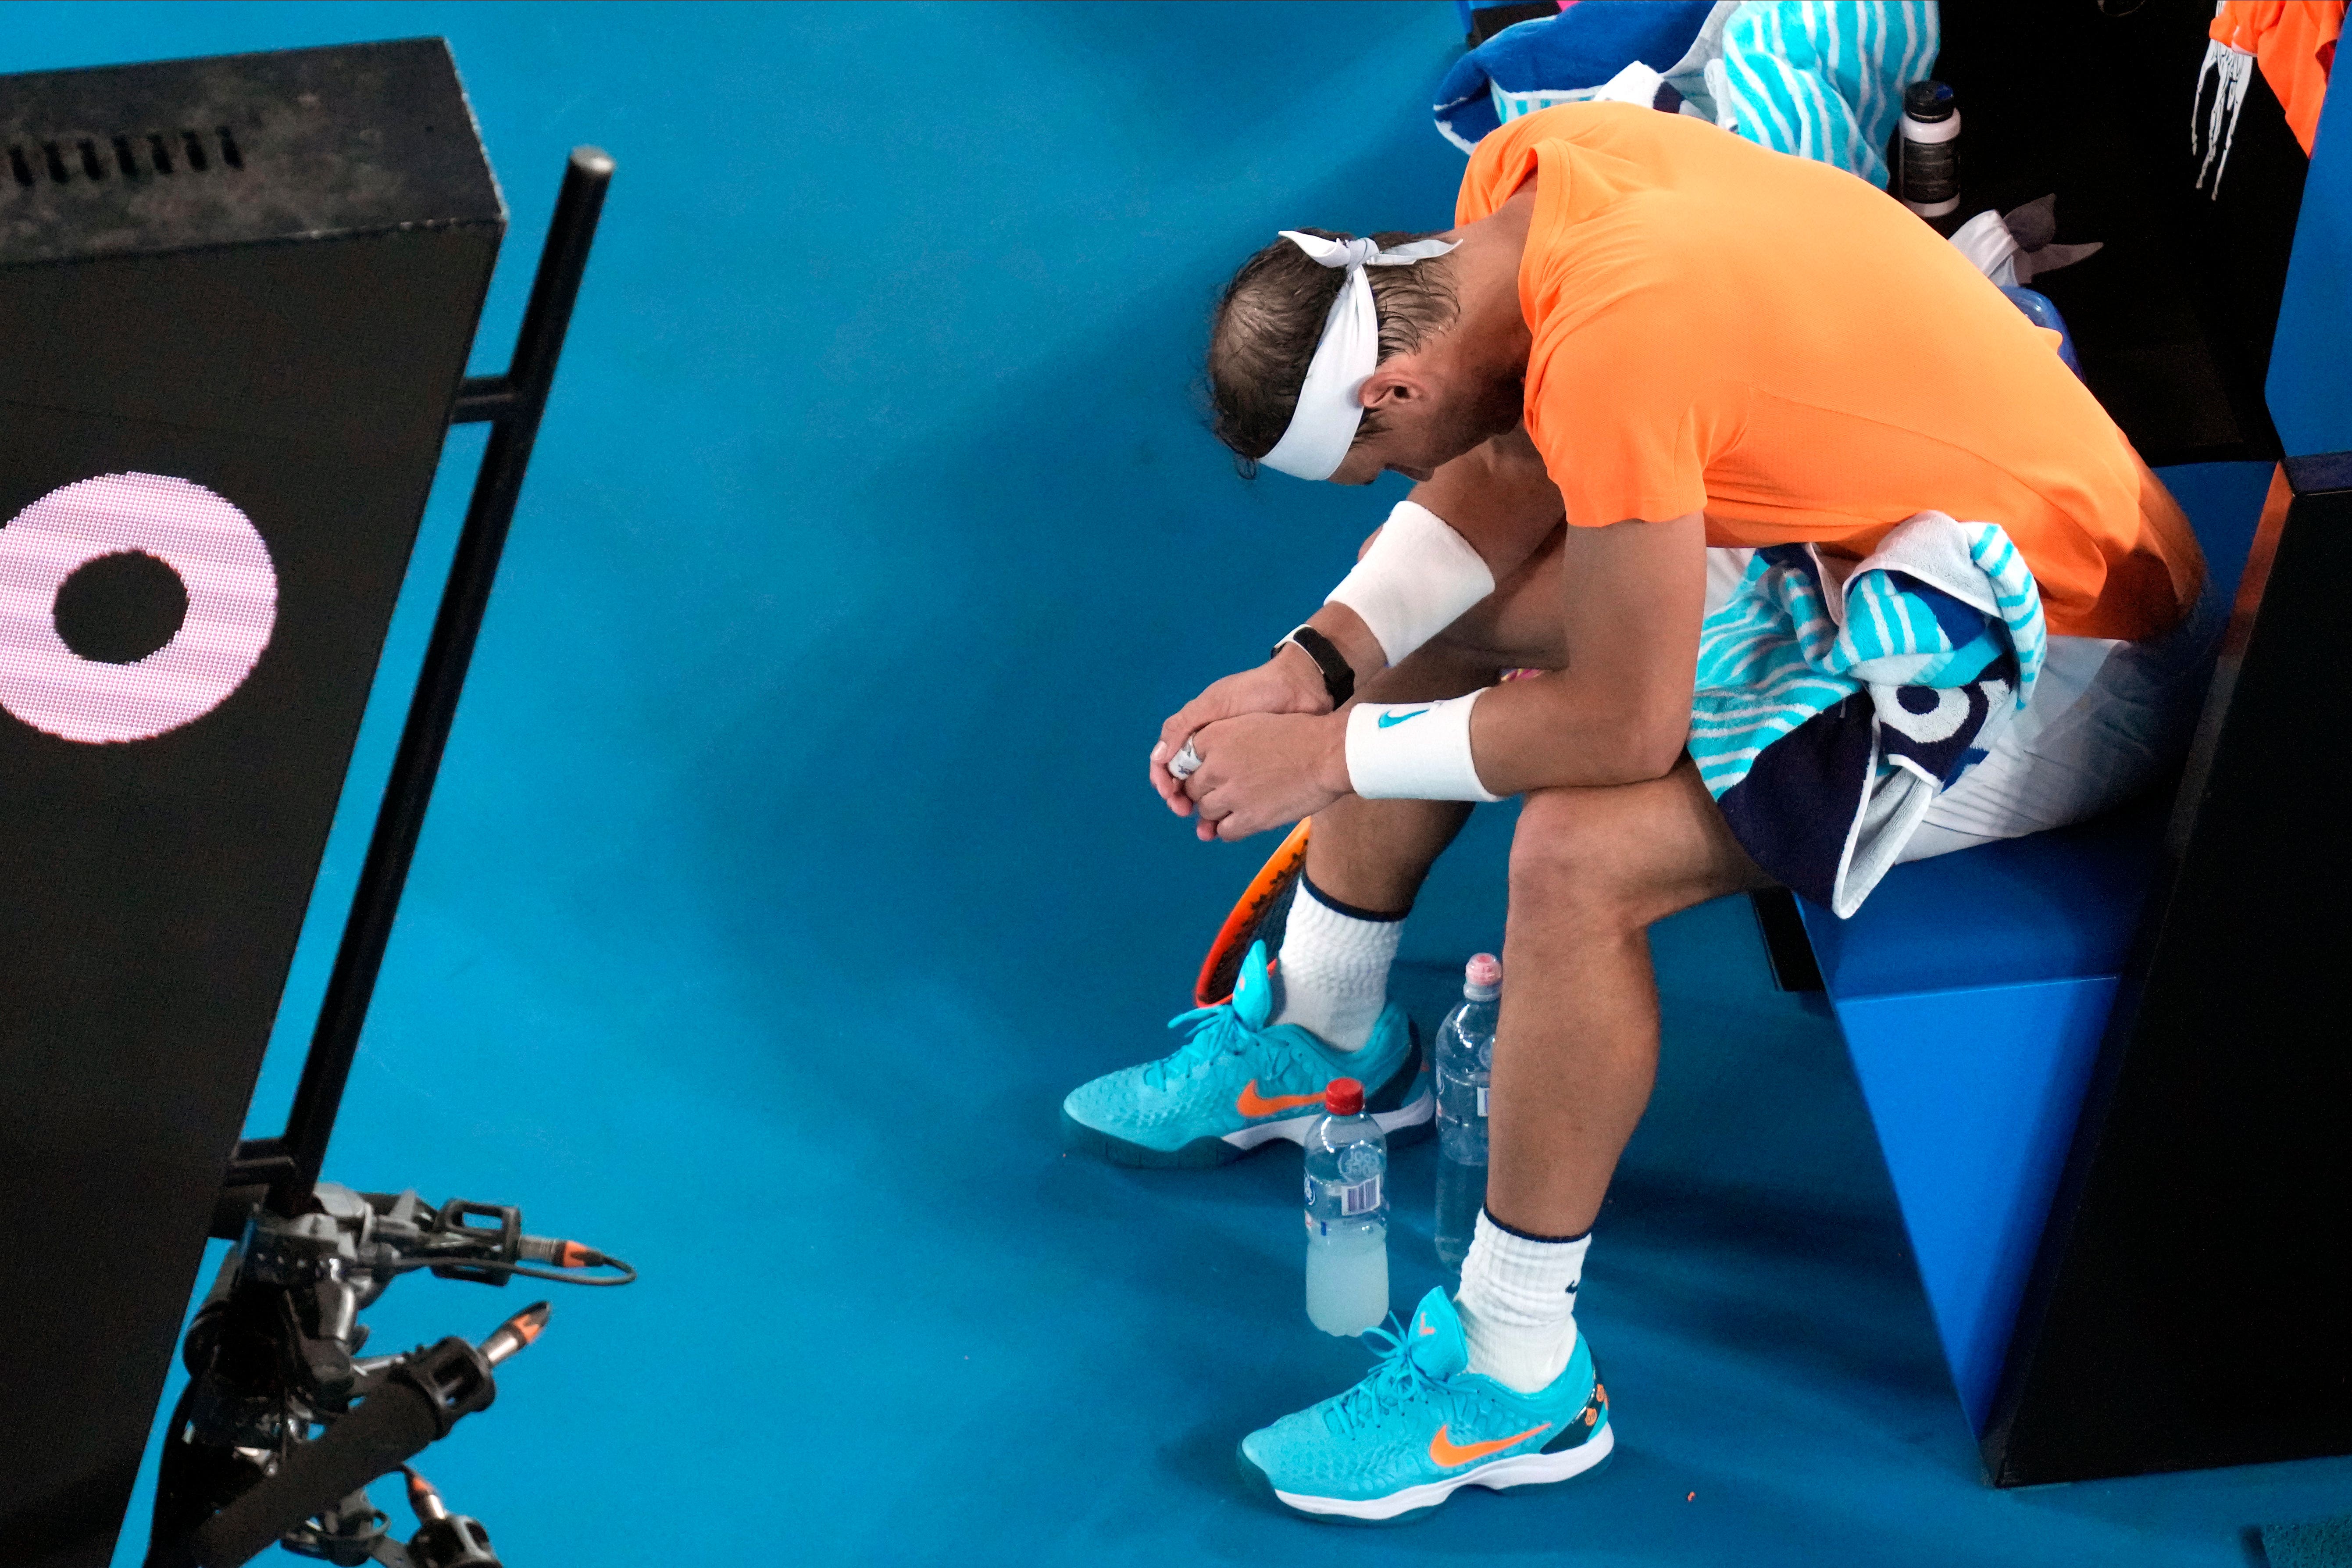 Rafael Nadal hangs his head after suffering an apparent hip injury